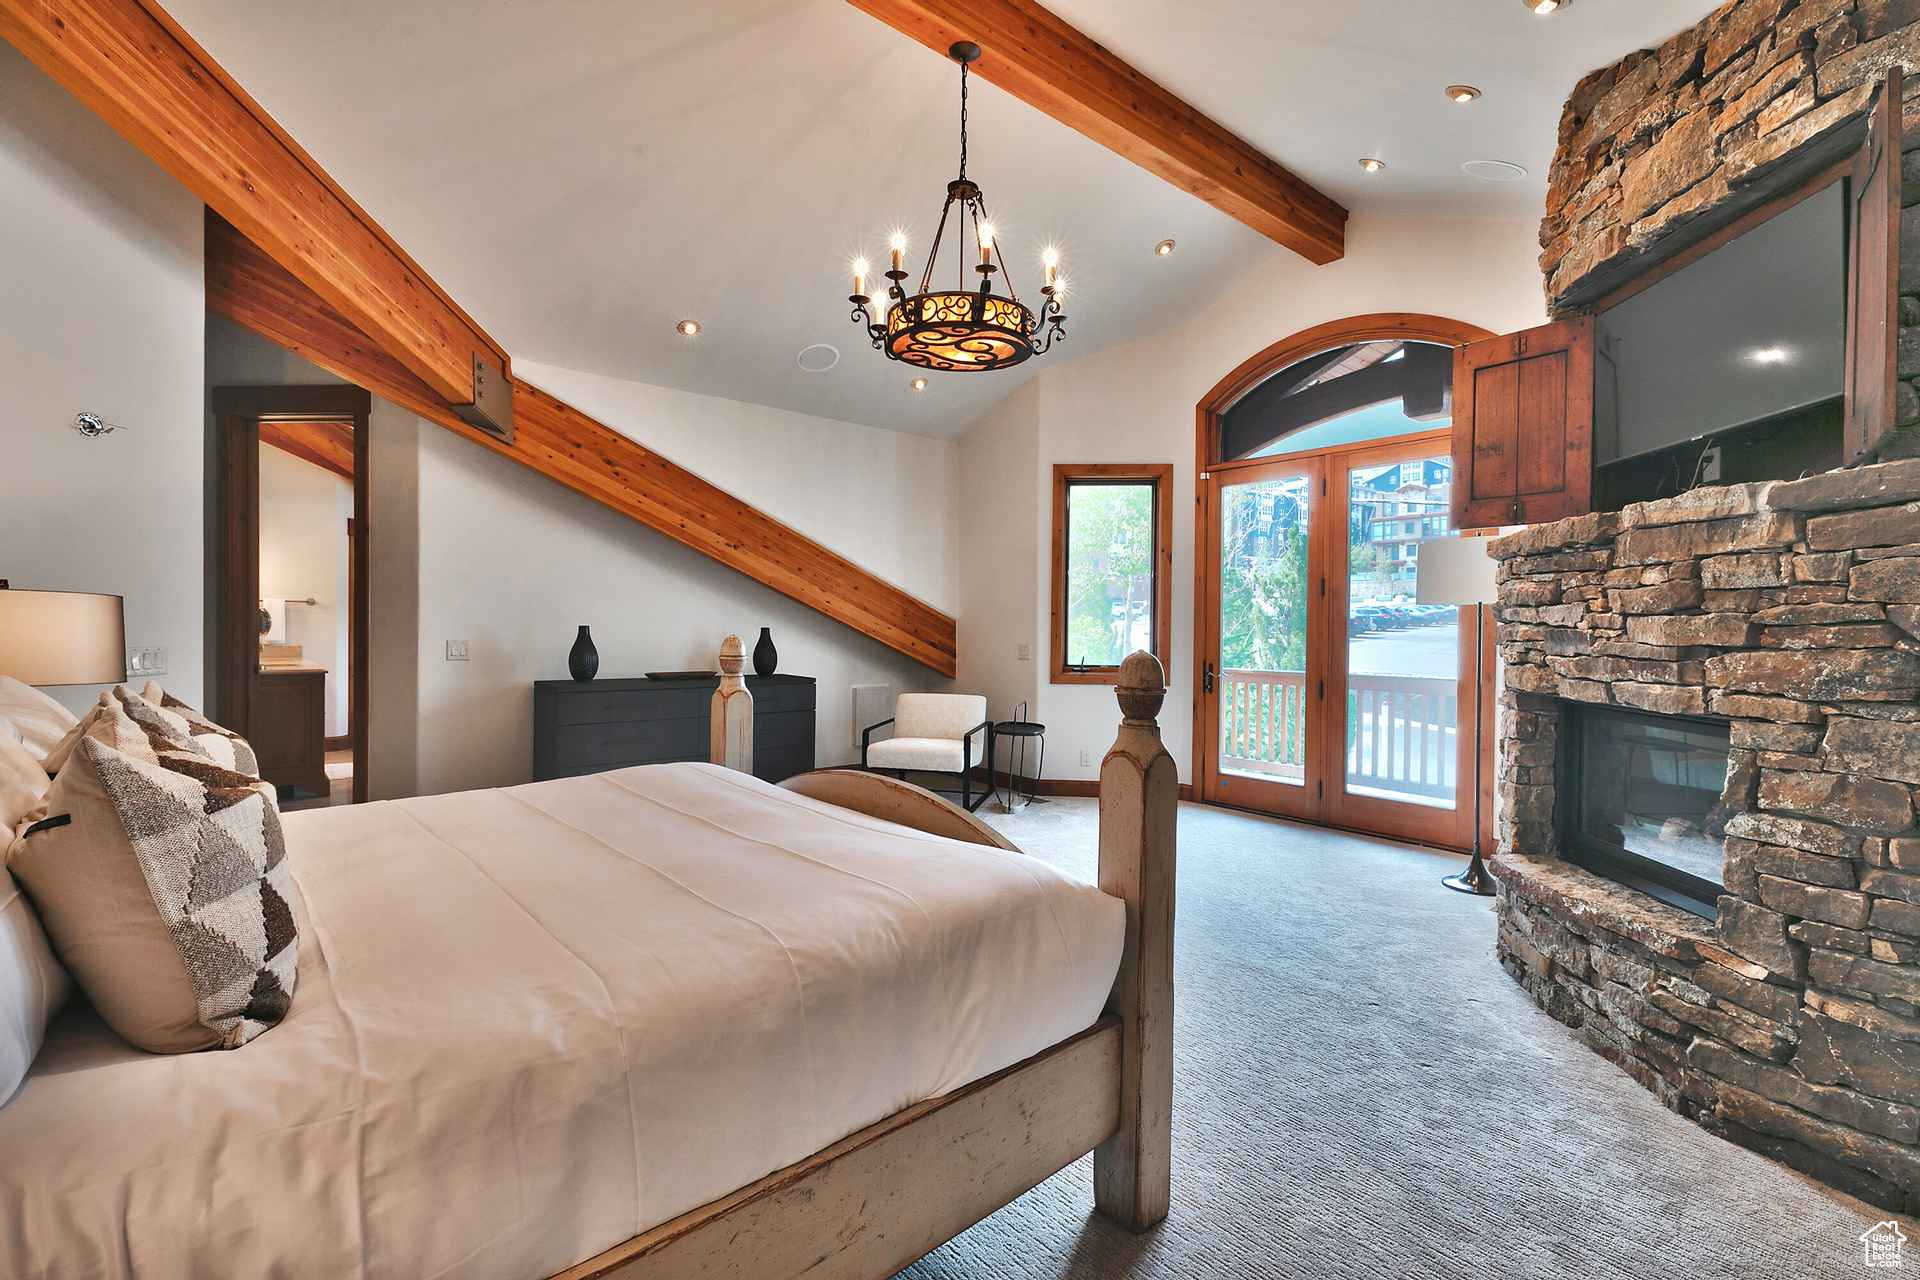 Carpeted bedroom with a stone fireplace, a chandelier, access to exterior, and lofted ceiling with beams